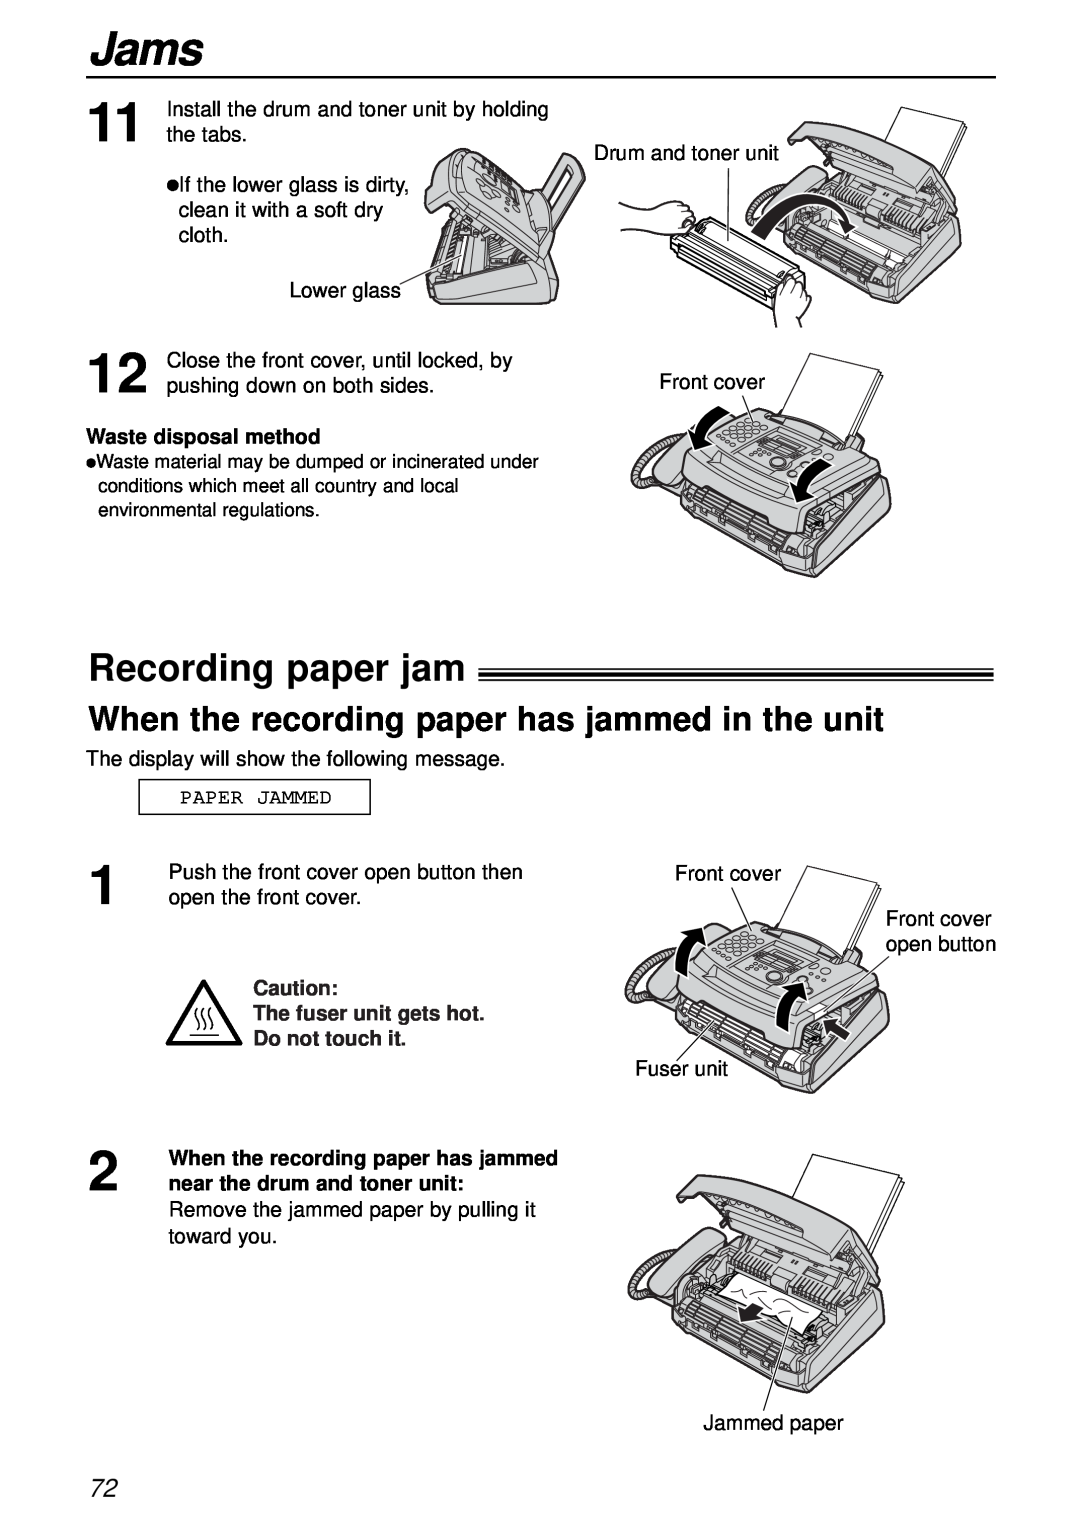 Panasonic KX-FL501AL Jams, Recording paper jam, When the recording paper has jammed in the unit, Waste disposal method 